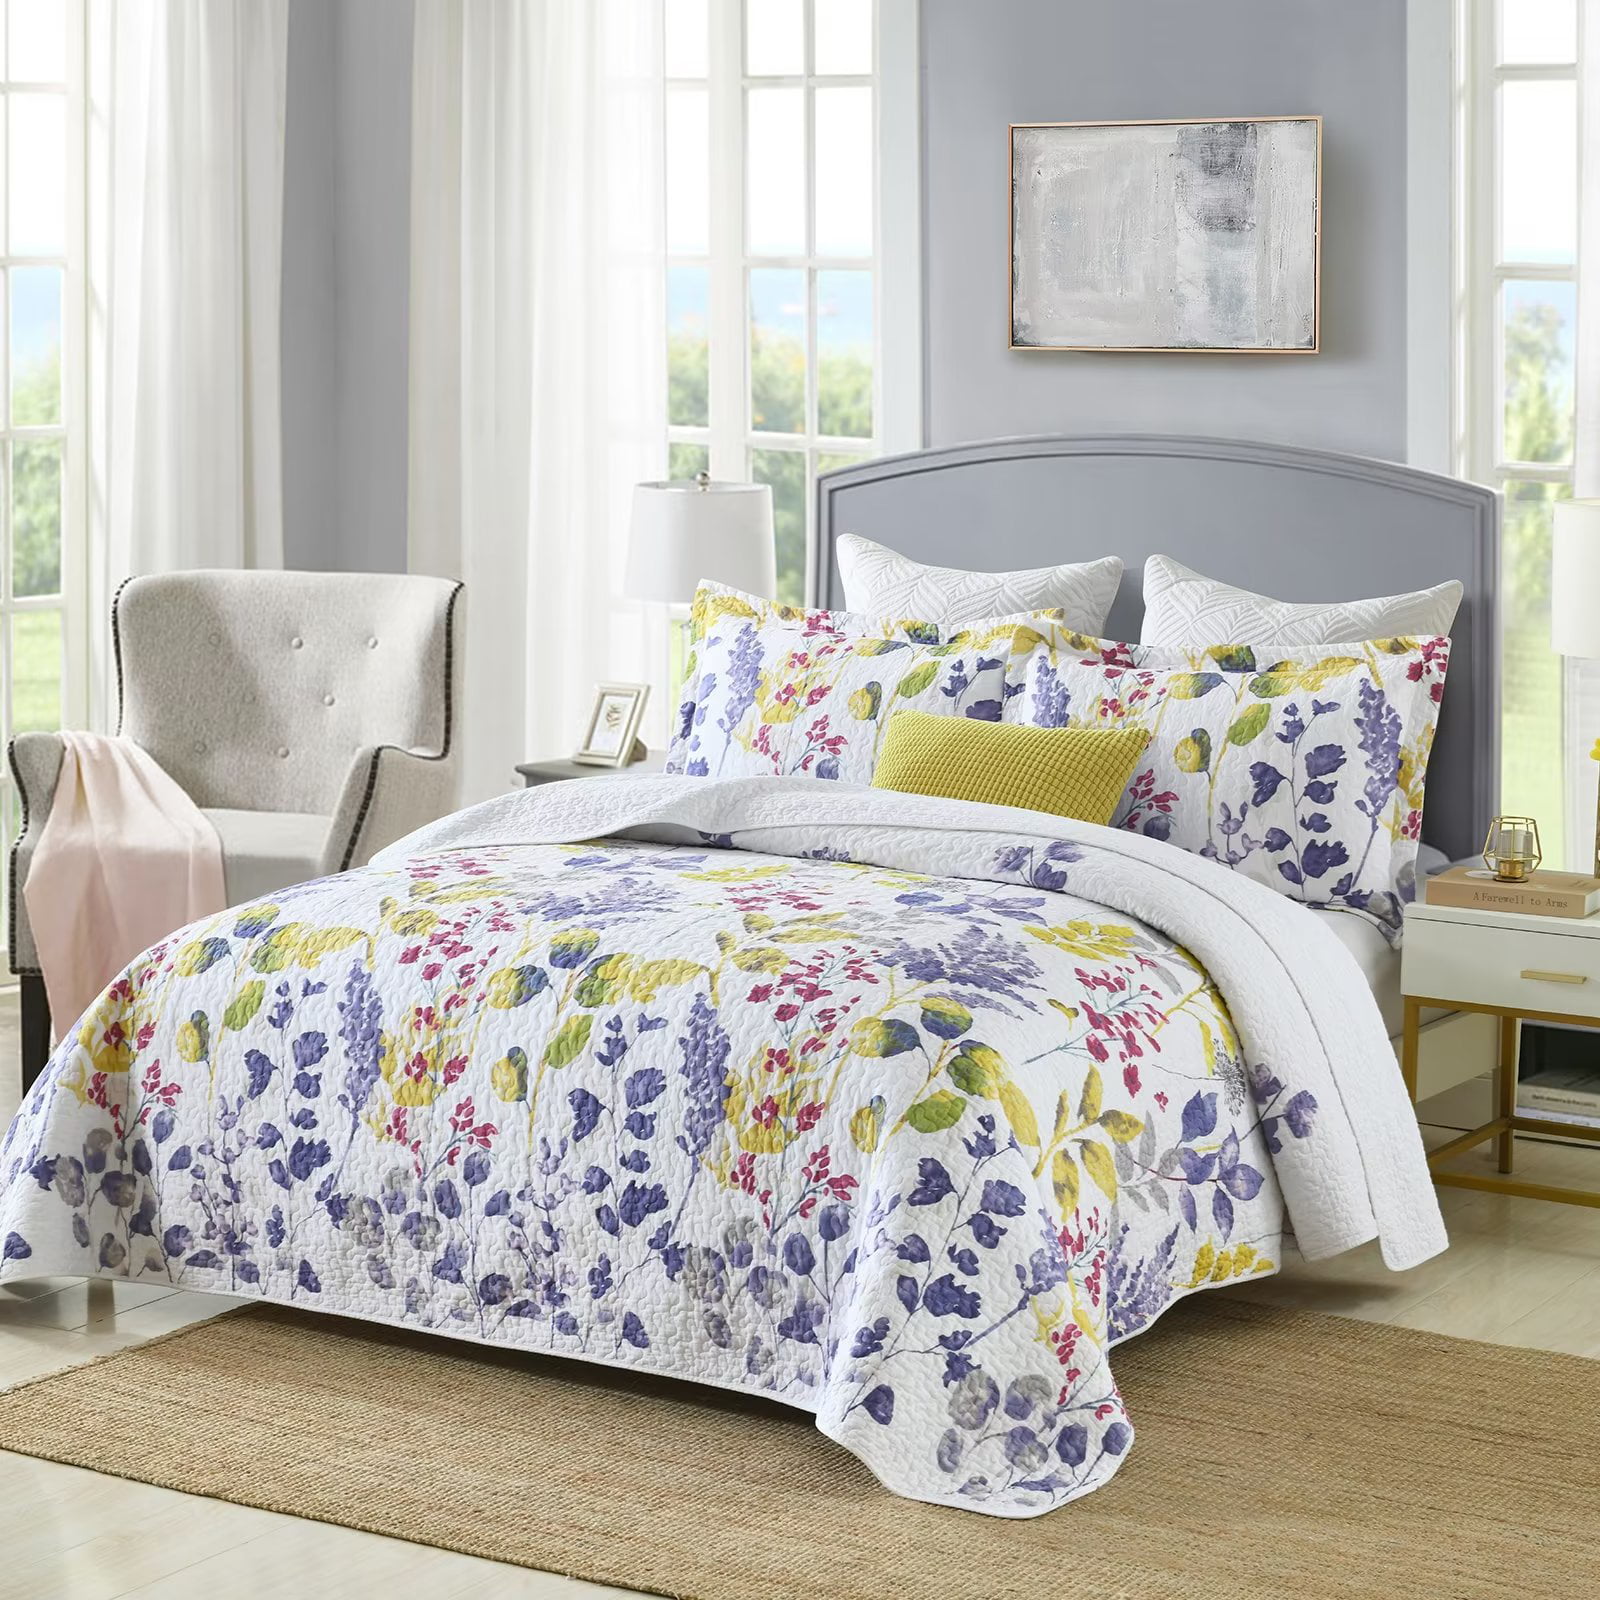 Lightweight Floral Quilt - Cotton - Spring Collection from Apollo Box